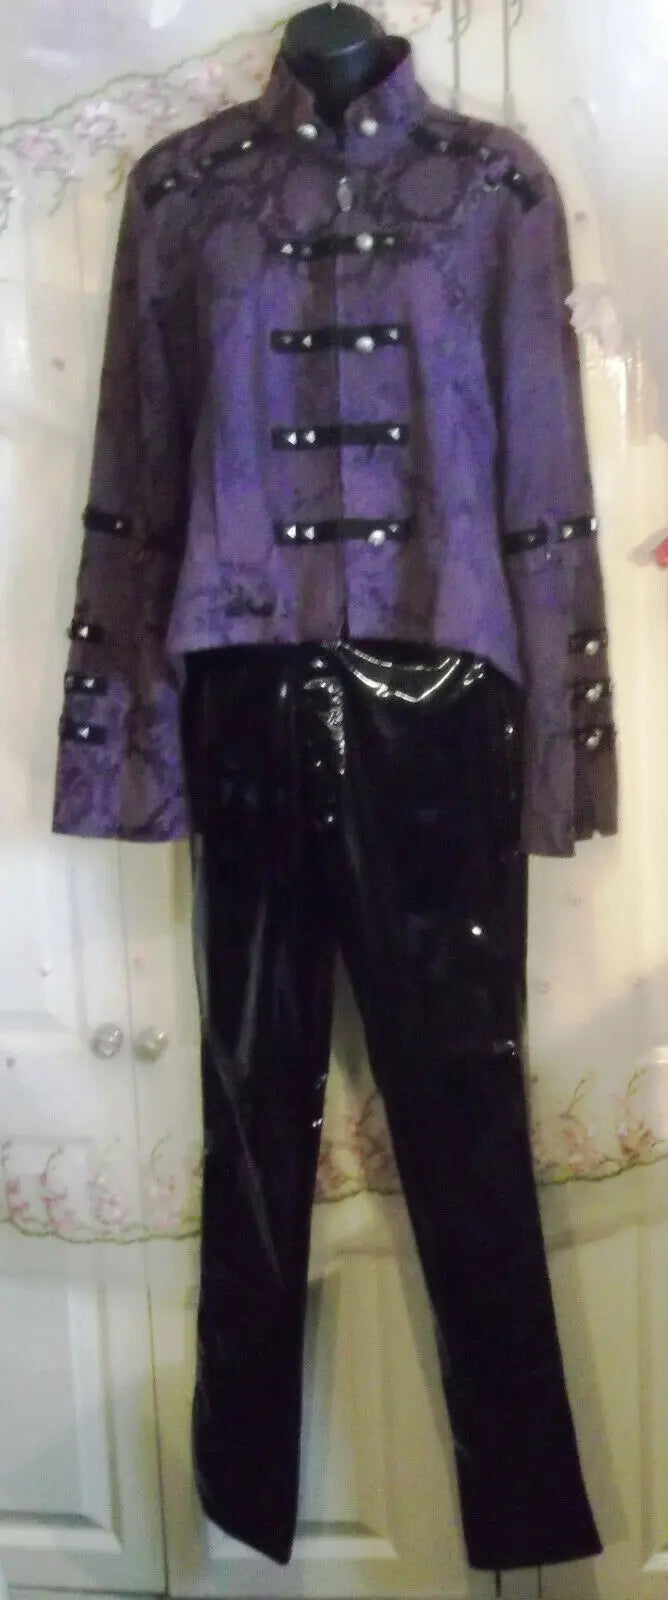 new without tags.punk/goth living dead soul purple jacket with studs accents Living Dead Souls